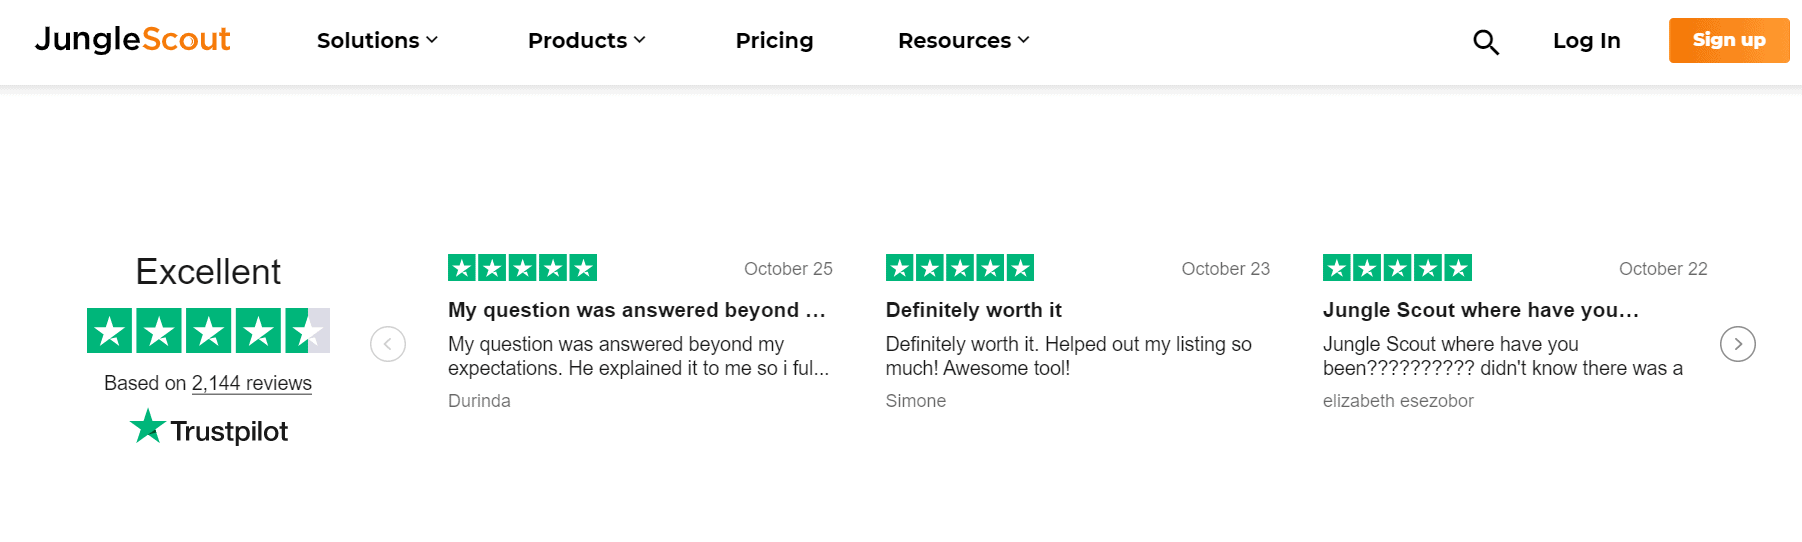 jungle scout customer reviews